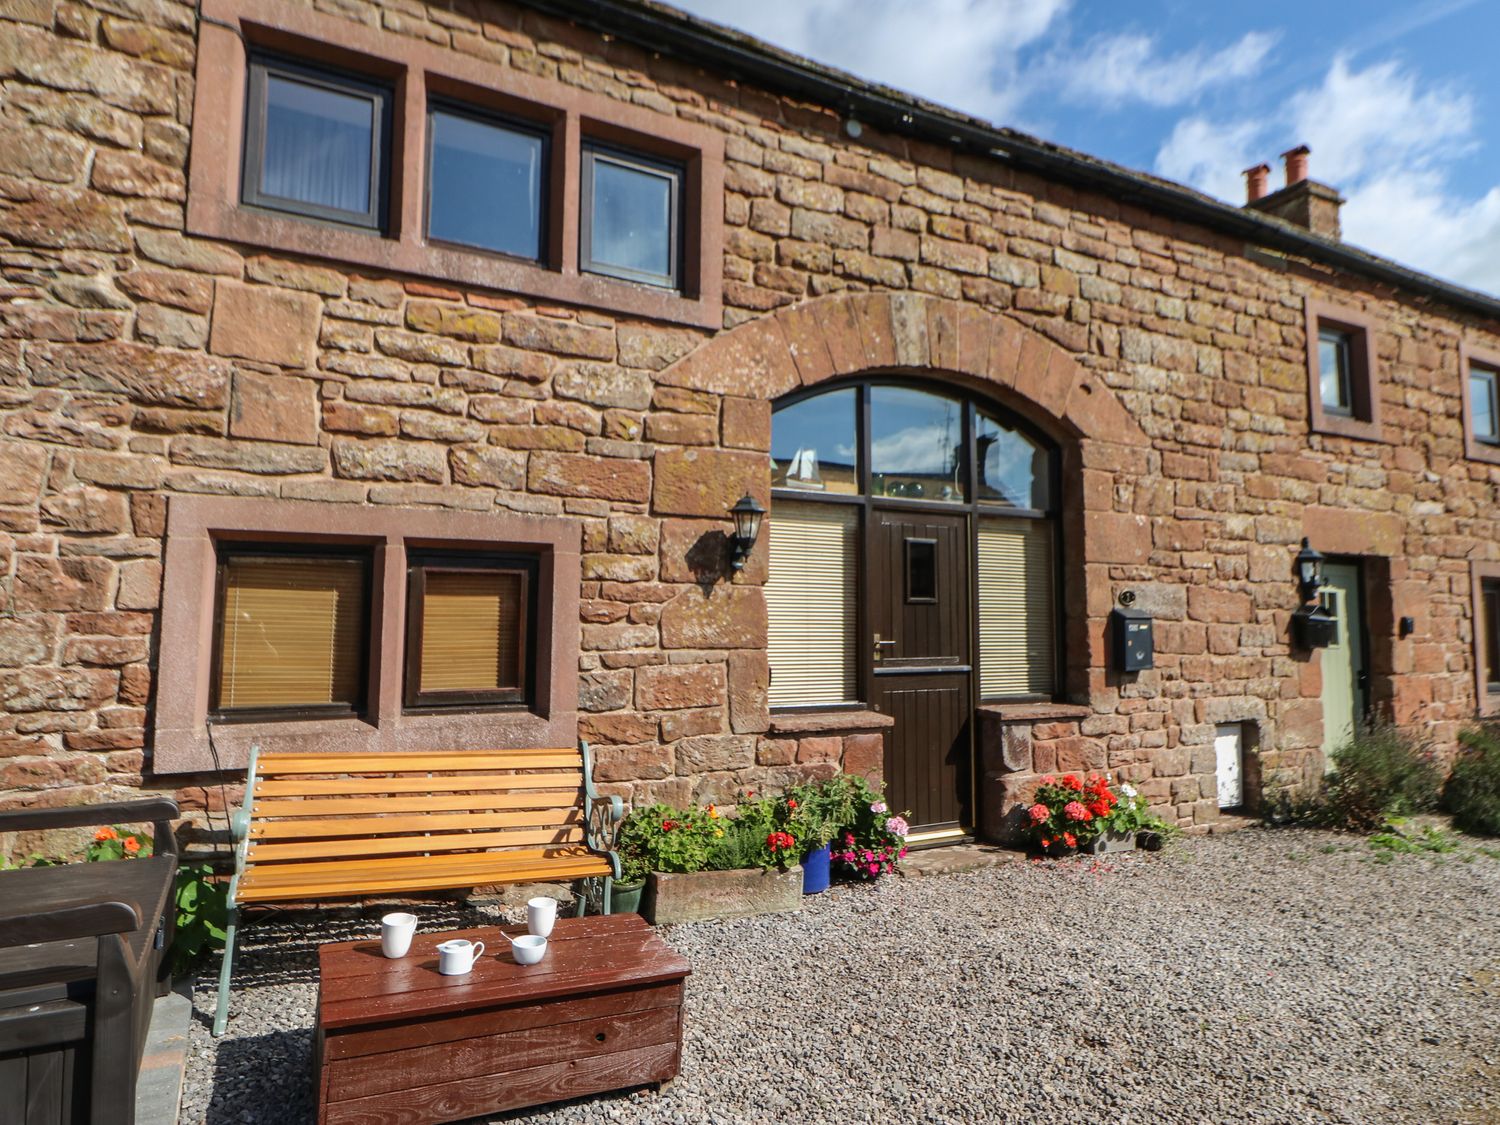 1 Yew Tree Cottages - Lake District - 1095938 - photo 1